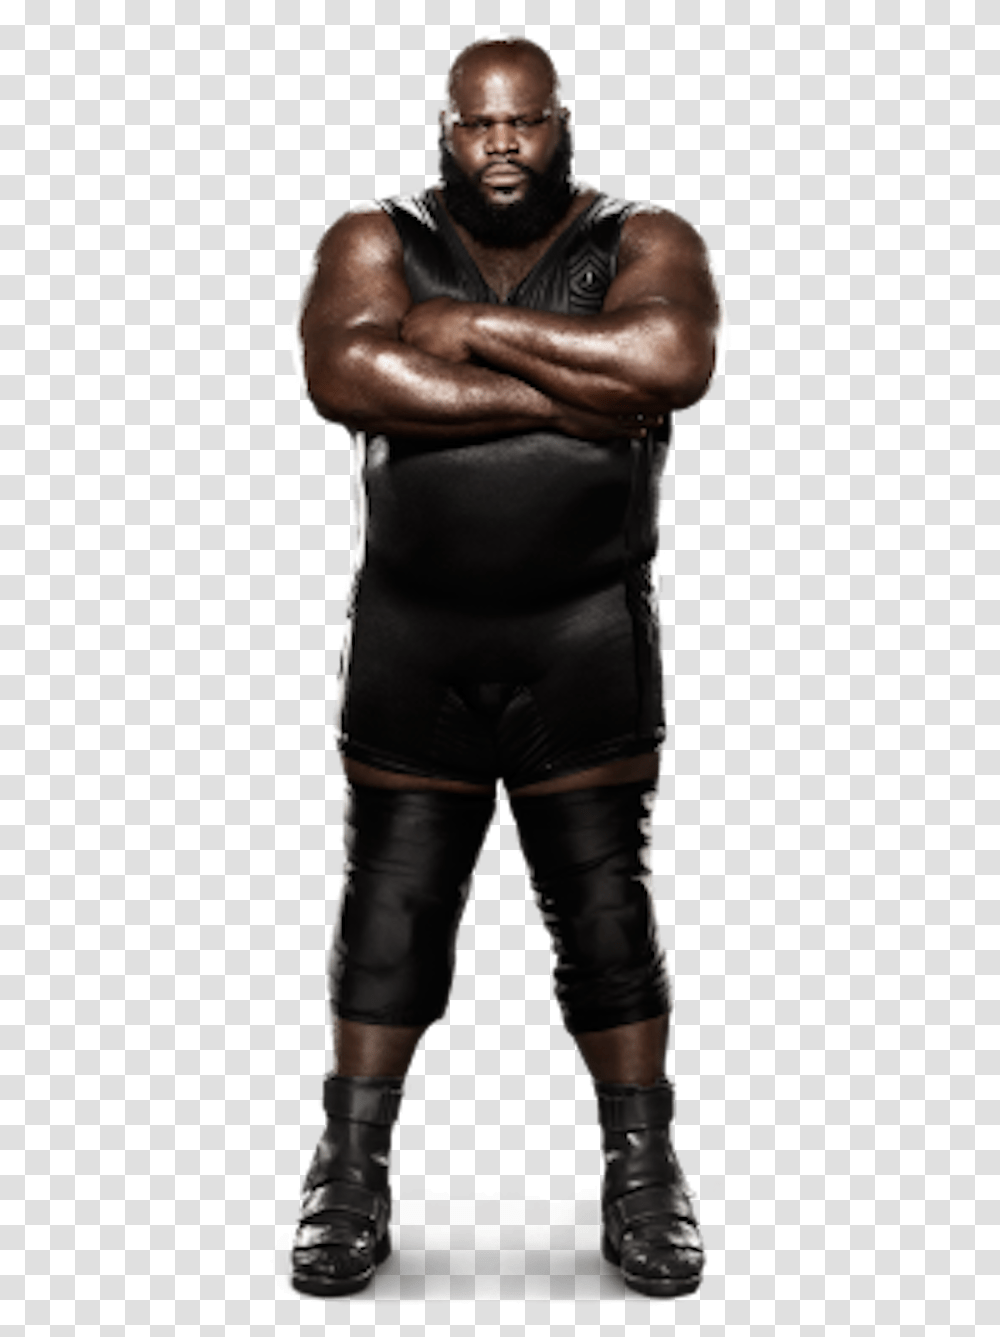 Universe Of Smash Bros Lawl Wwe Mark Henry, Person, Thigh, Pants Transparent Png